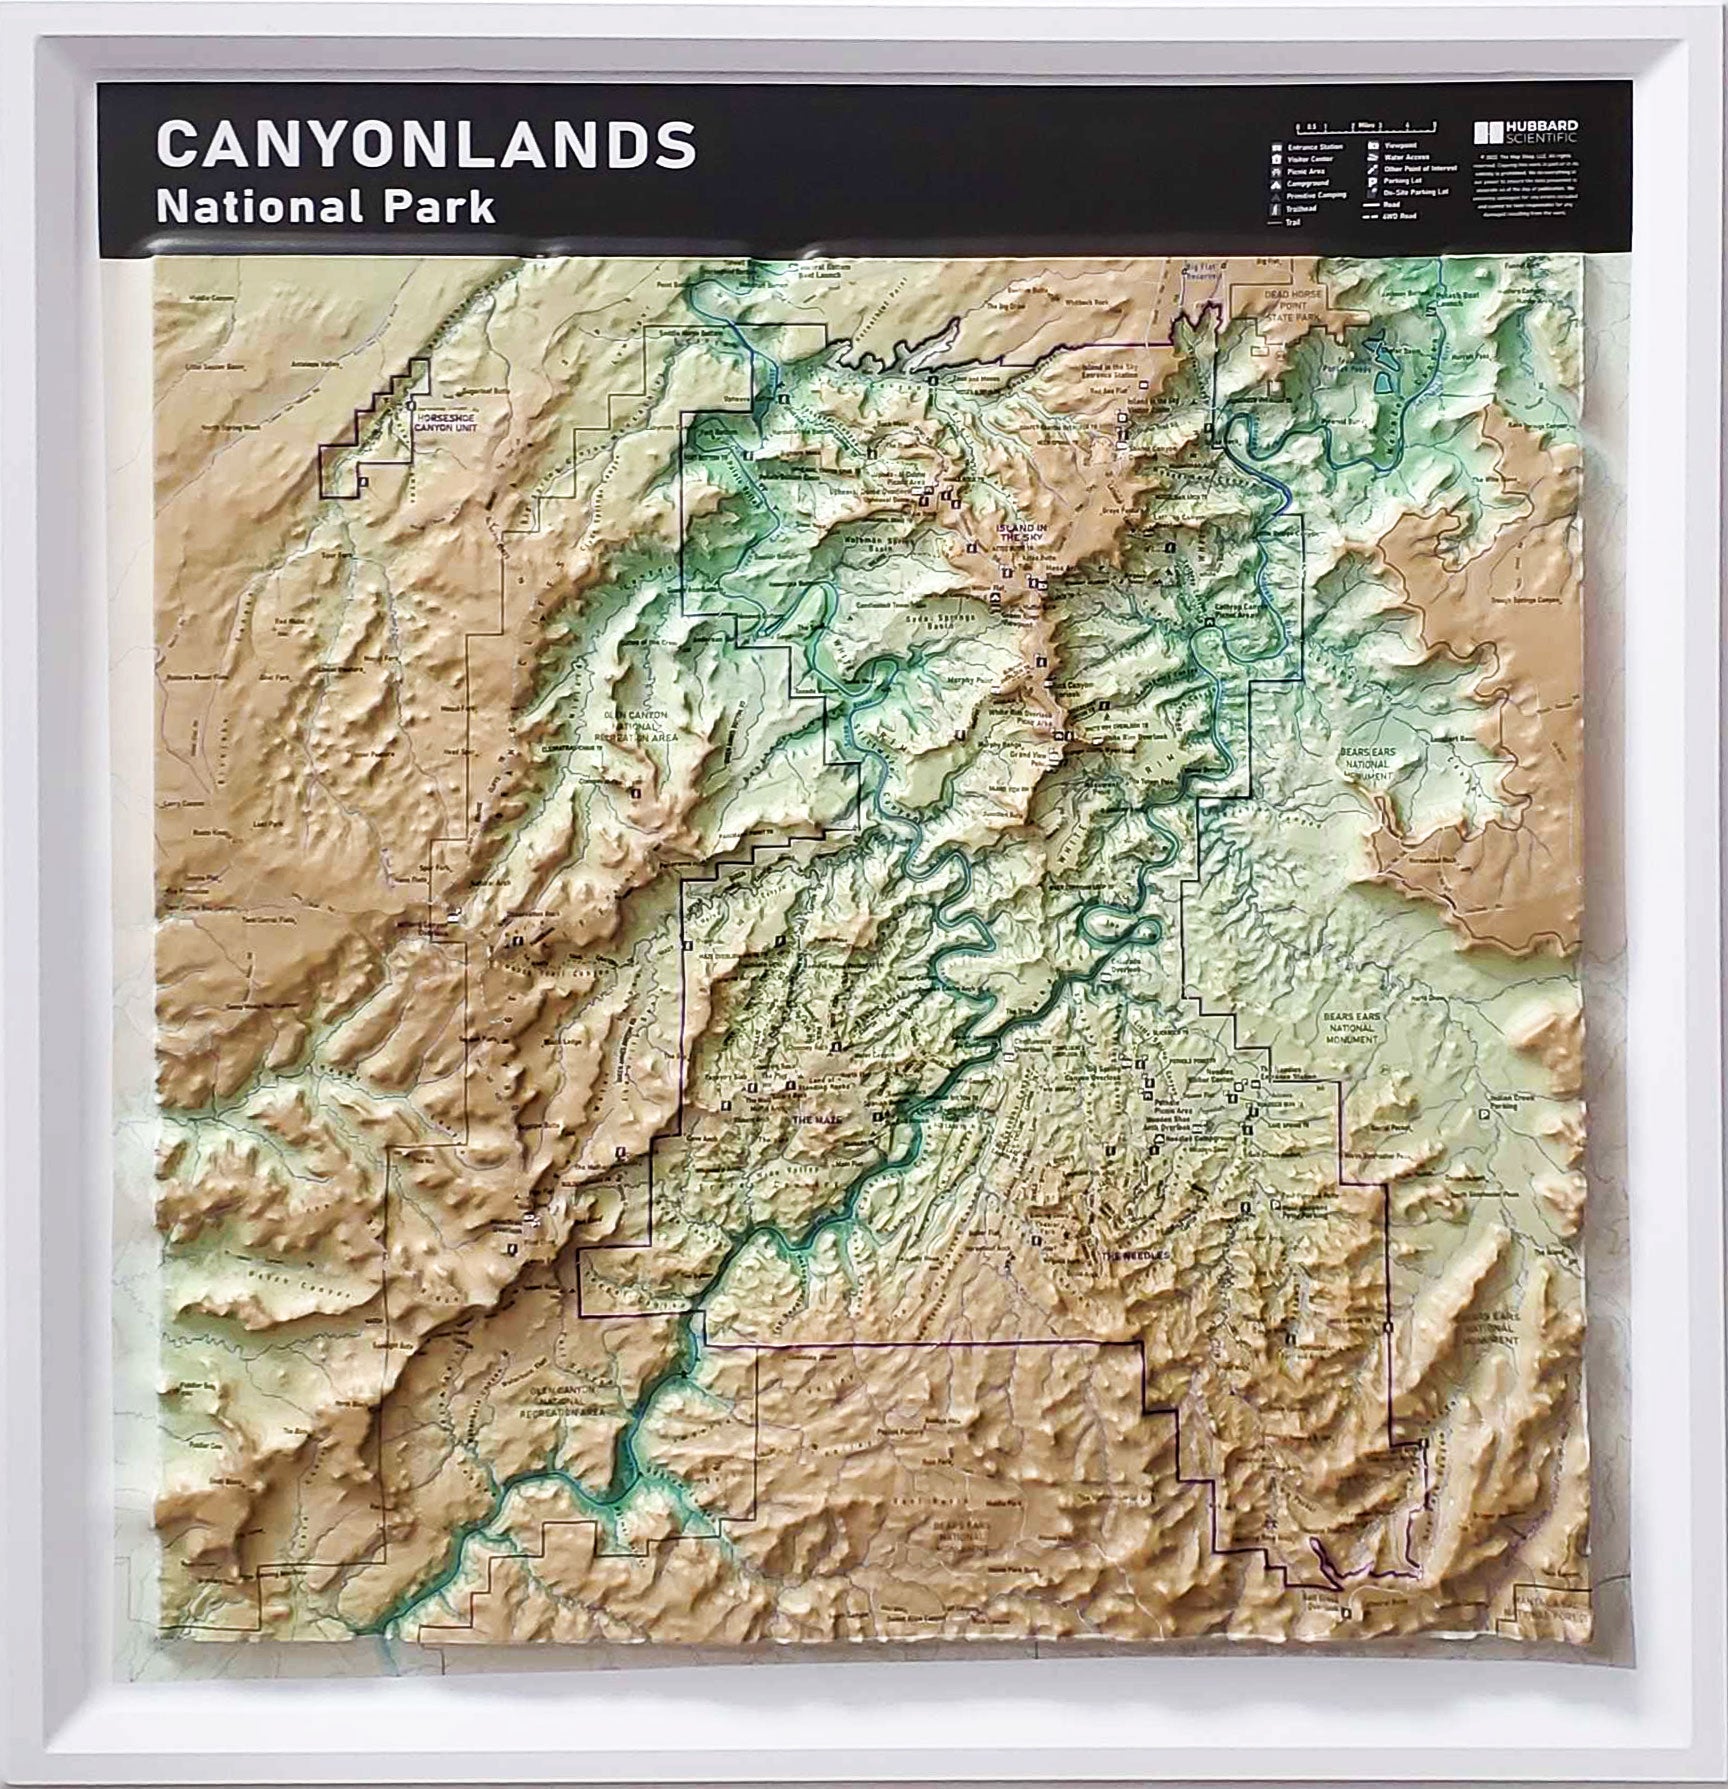 Three-dimensional (3D) raised relief map of Canyonlands National Park, Utah, showcasing The Needles, The Maze, and Mesa Arch in stunning detail. The map highlights canyons, mesas, buttes, and rivers that shape this dramatic landscape.